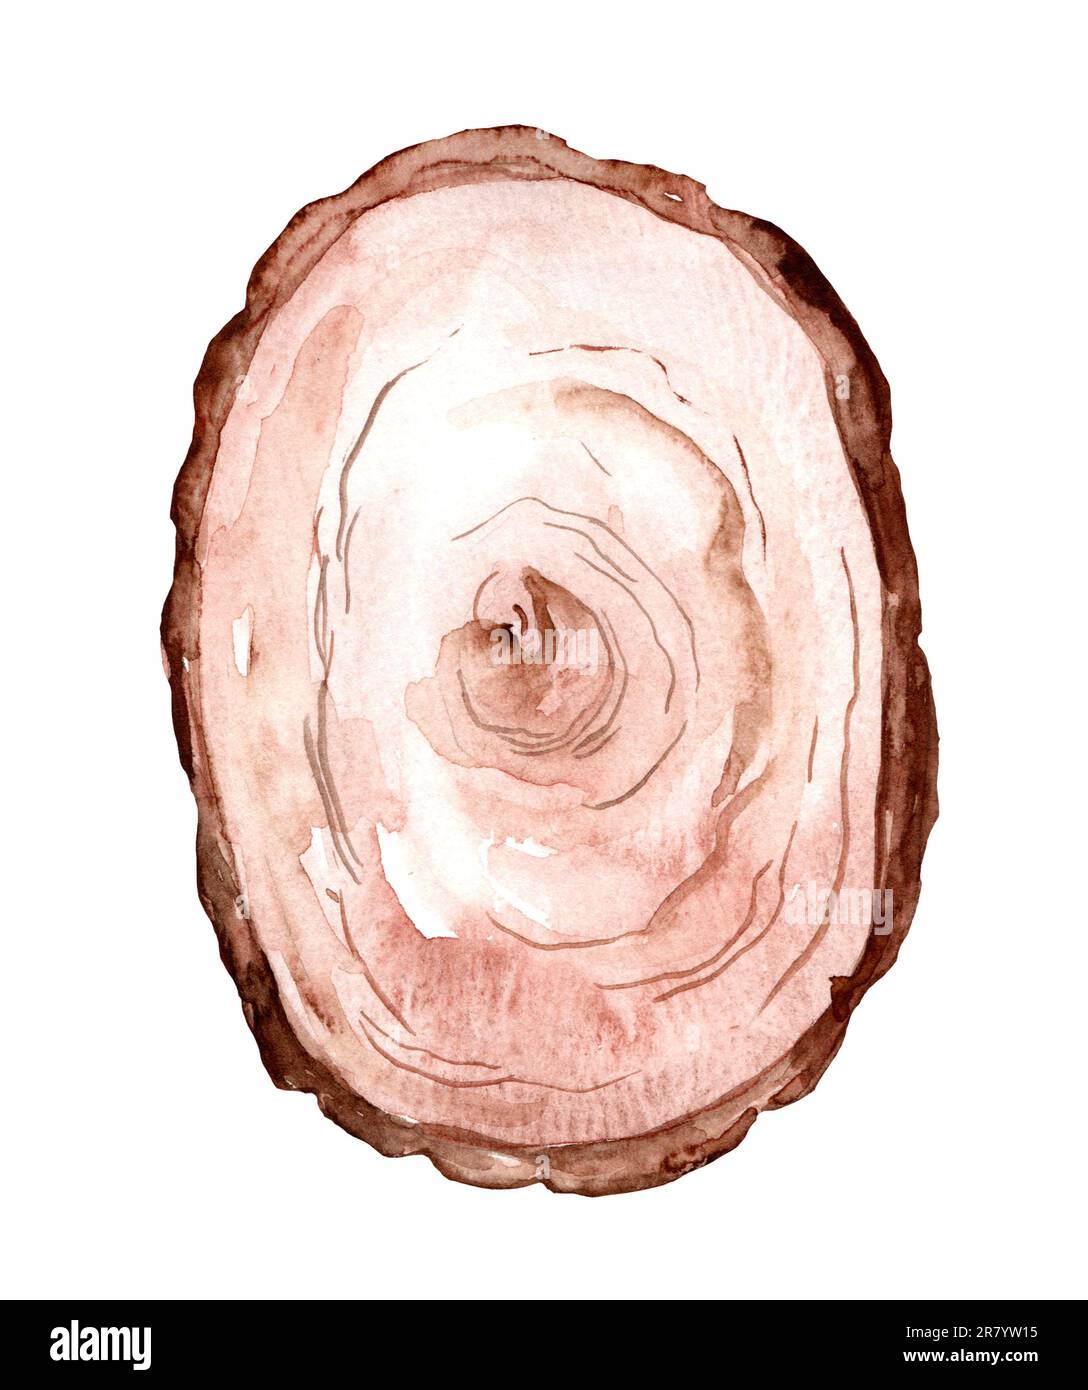 Section of cracked aged wooden tree with rings and texture isolated on white. watercolor illustration Stock Photo